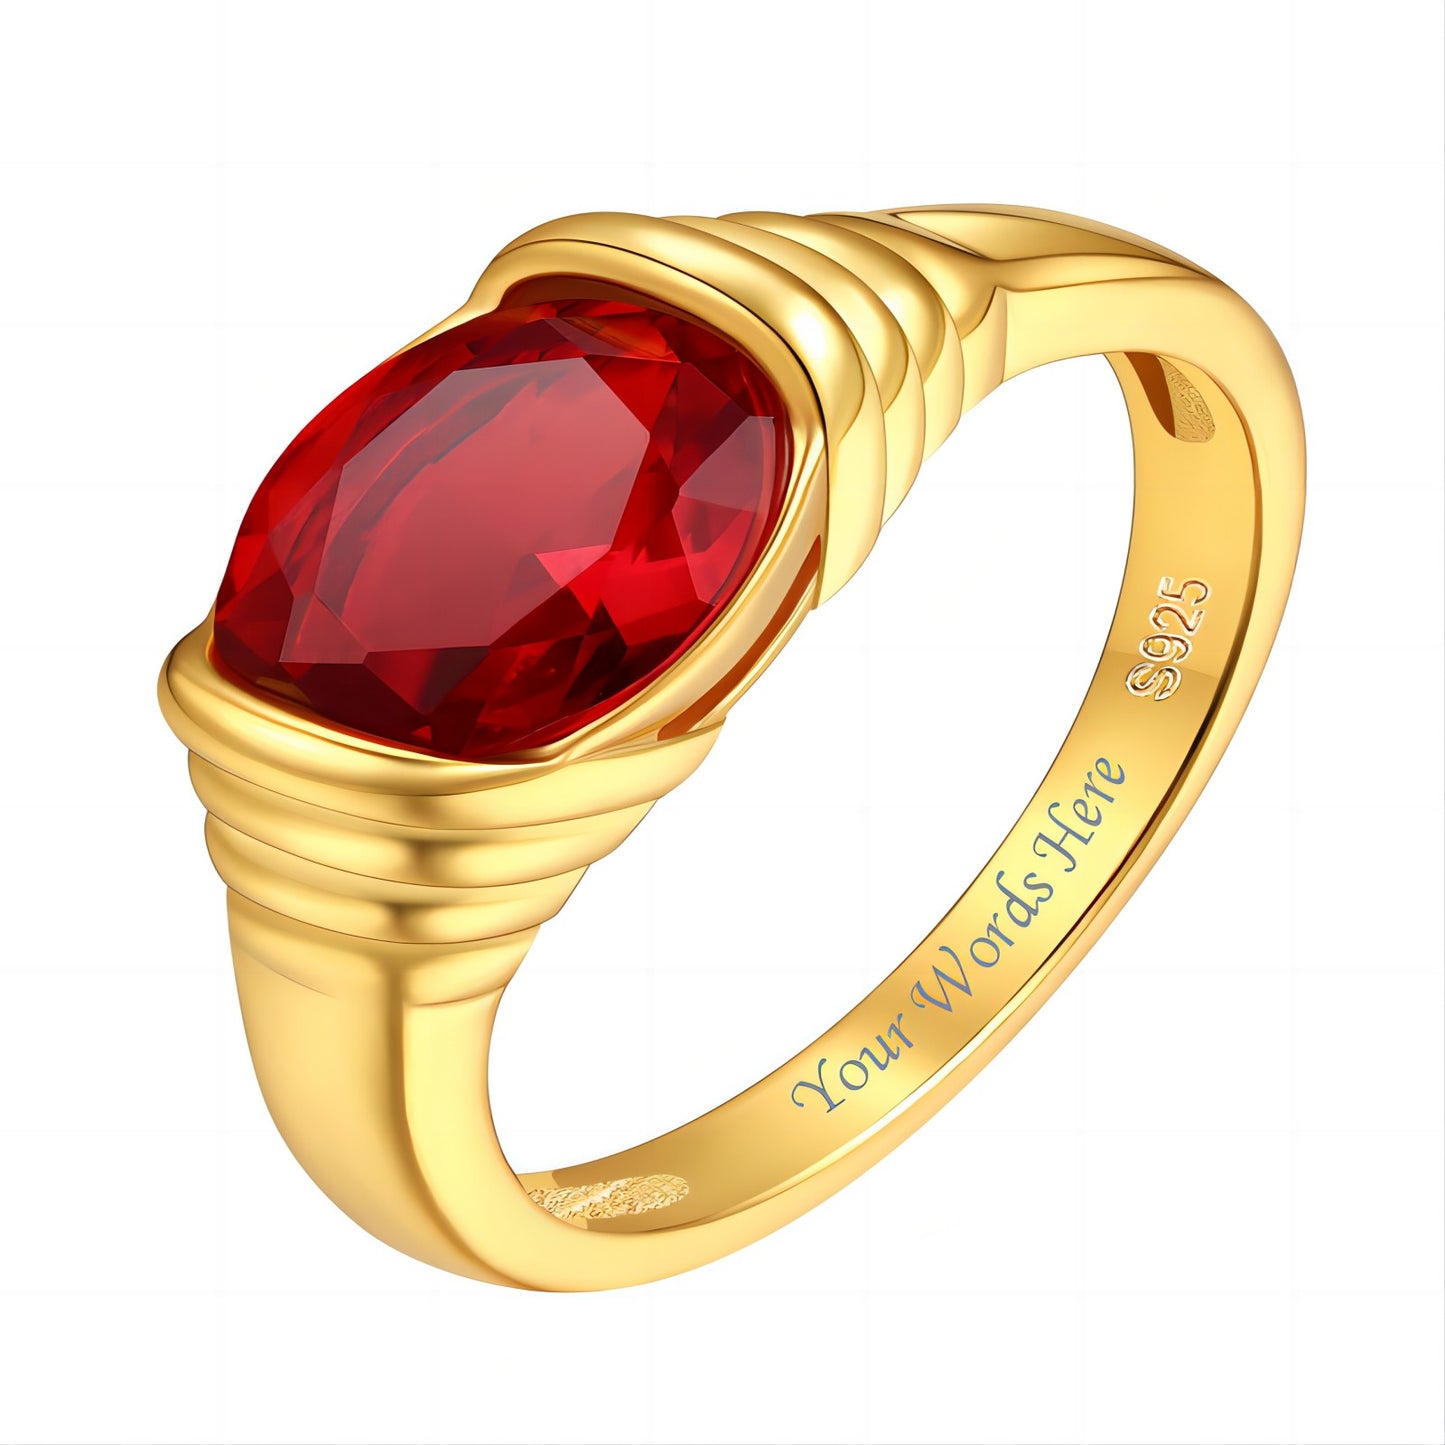 Birthstonesjewelry Personalized Birthstone Ring Gold Plated